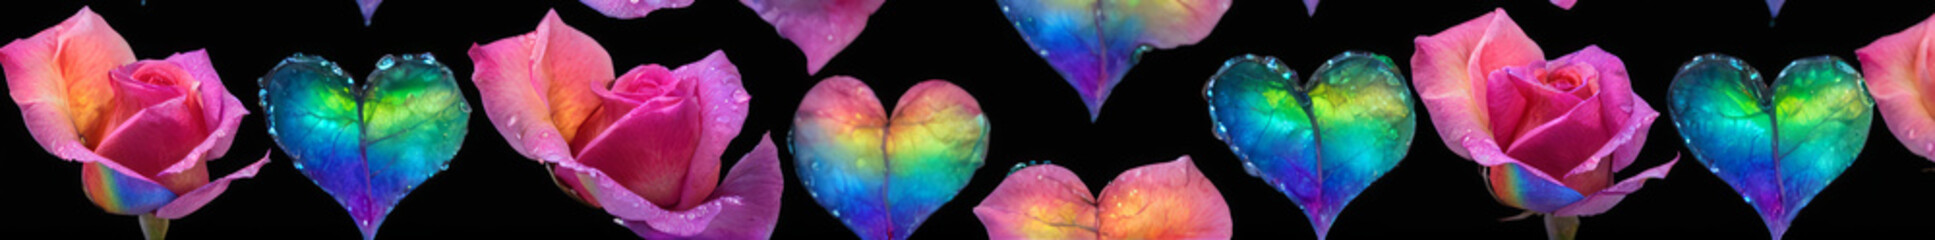 Beautiful iridescent soft rainbow rose, hearts, dark background, moody, atmospheric, impossible rose, colour of pride rose, LGBT+, rainbow, Valentine’s Day, valentine, website header, leaderboard